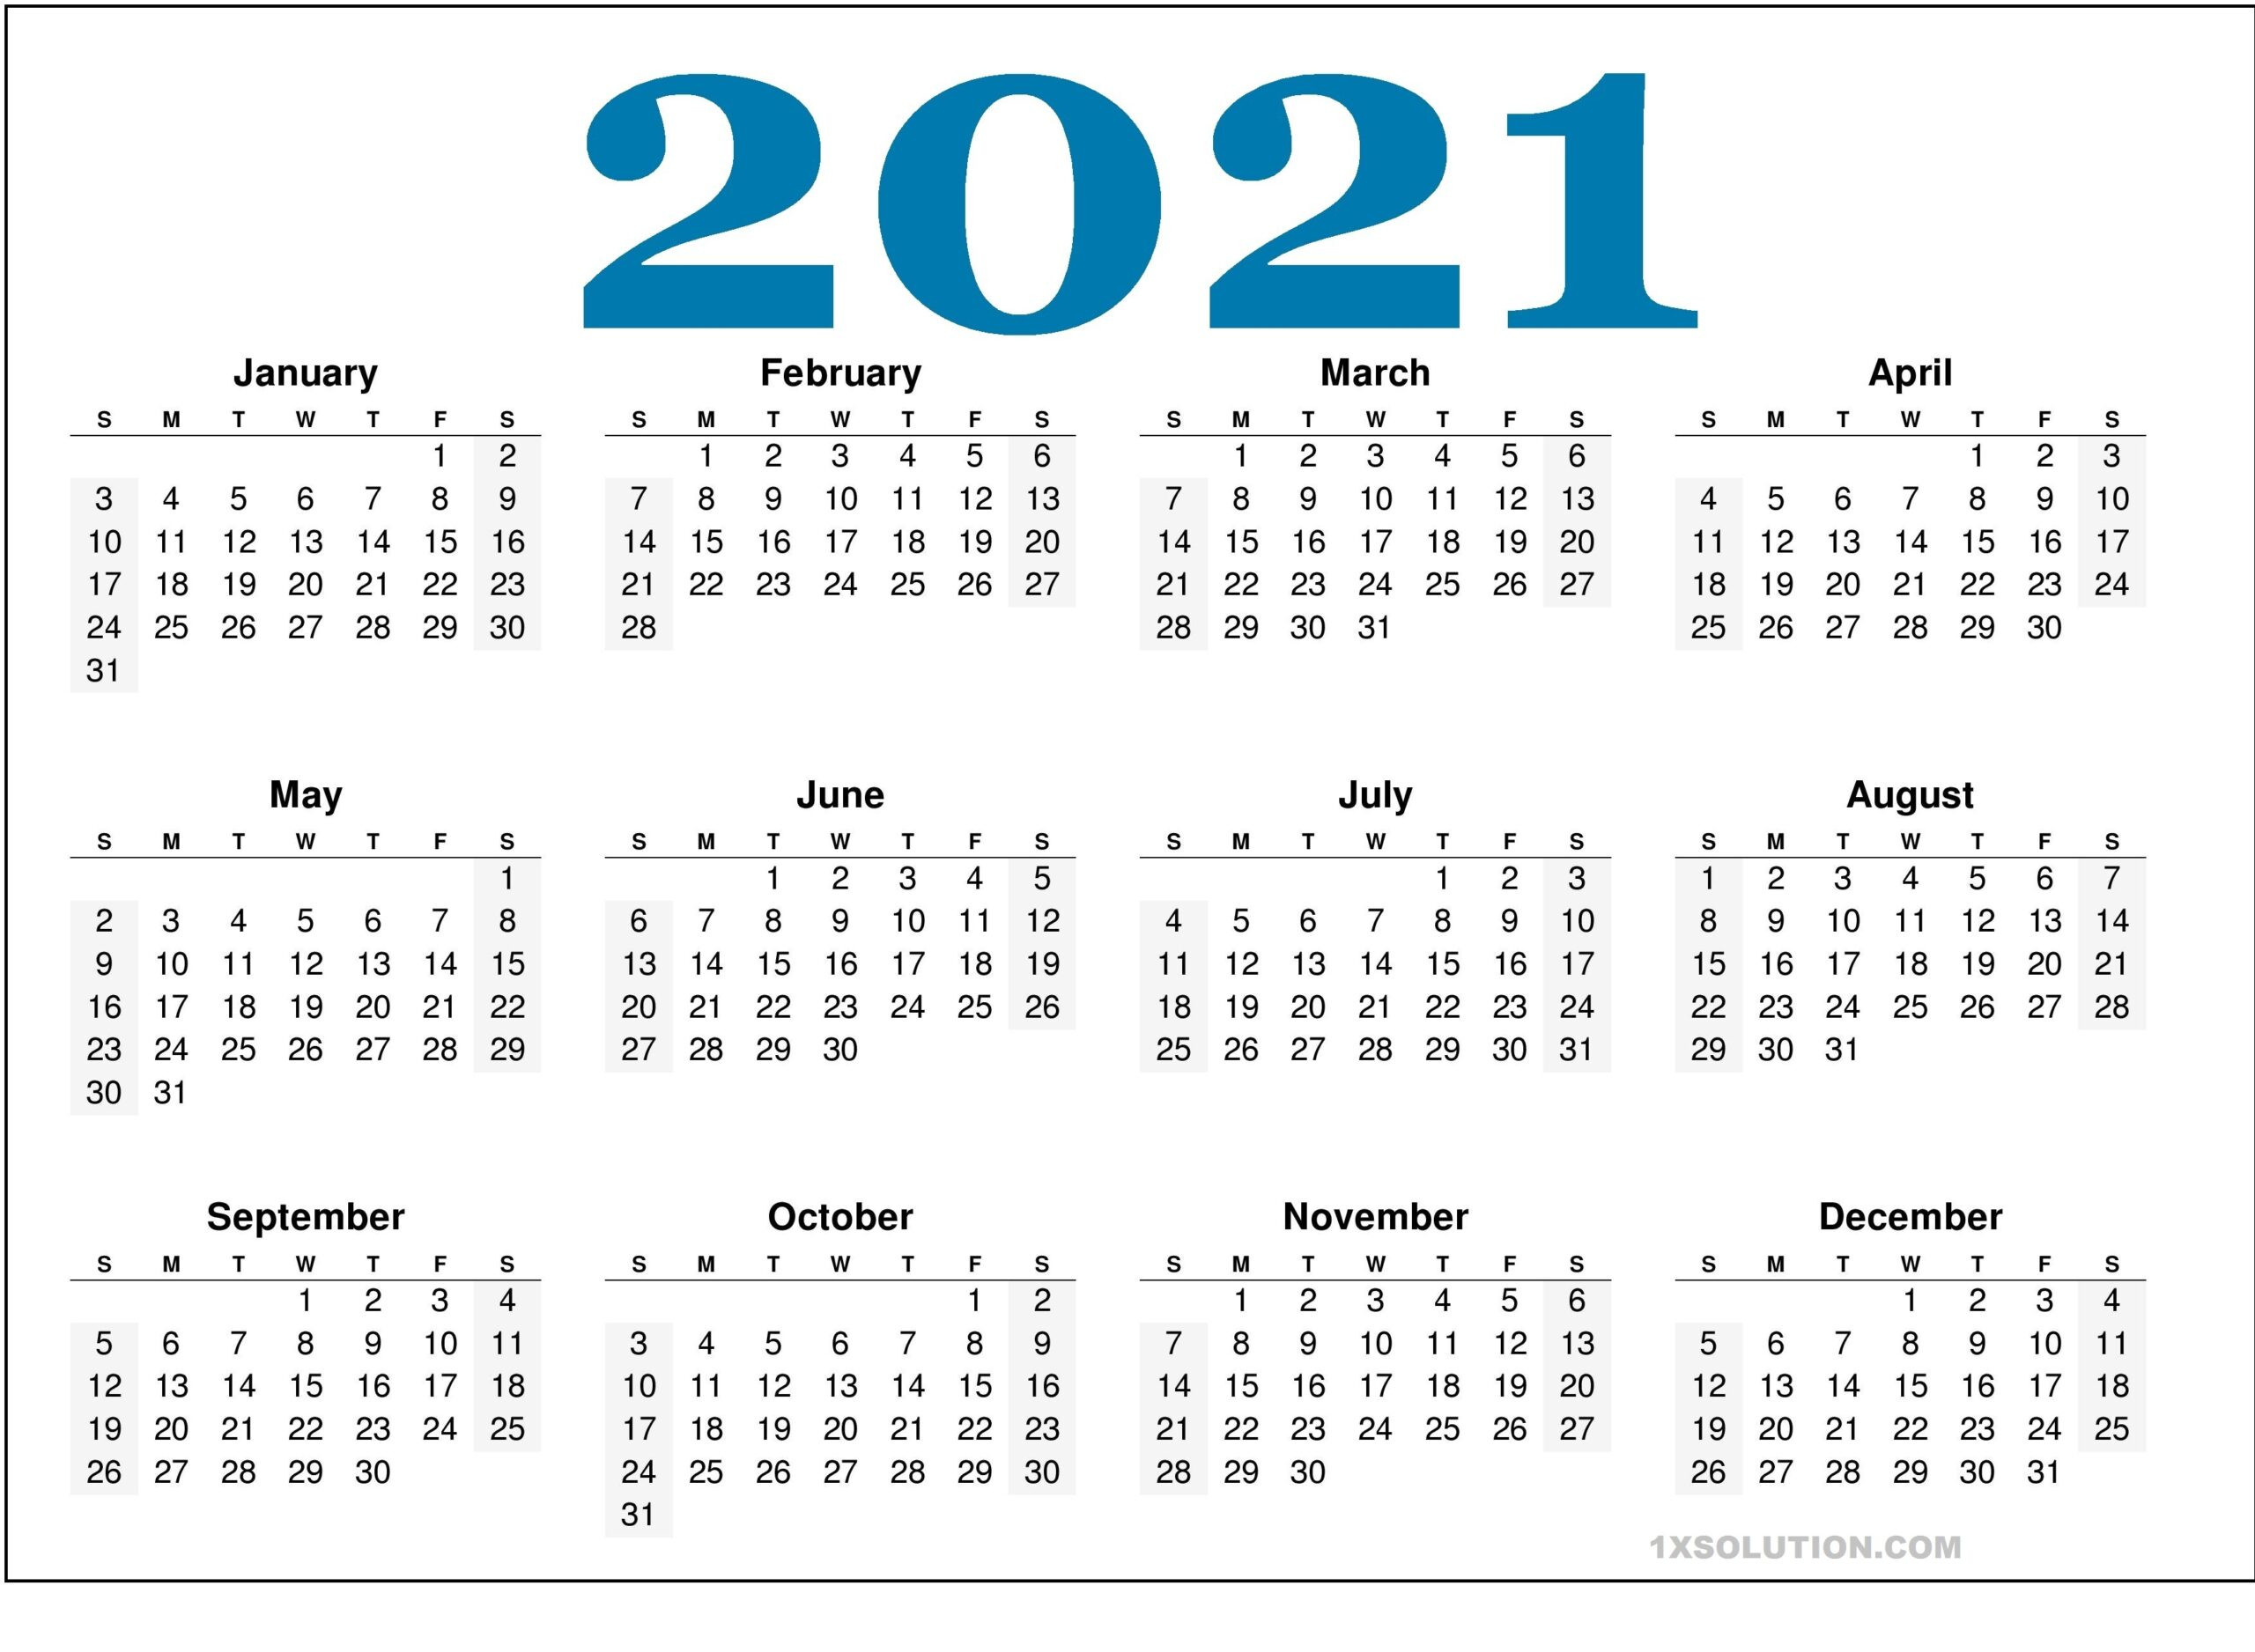 2021 Daily Calendar: To Write Your Important Schedule-2021 Holiday Calendar Spreadsheet